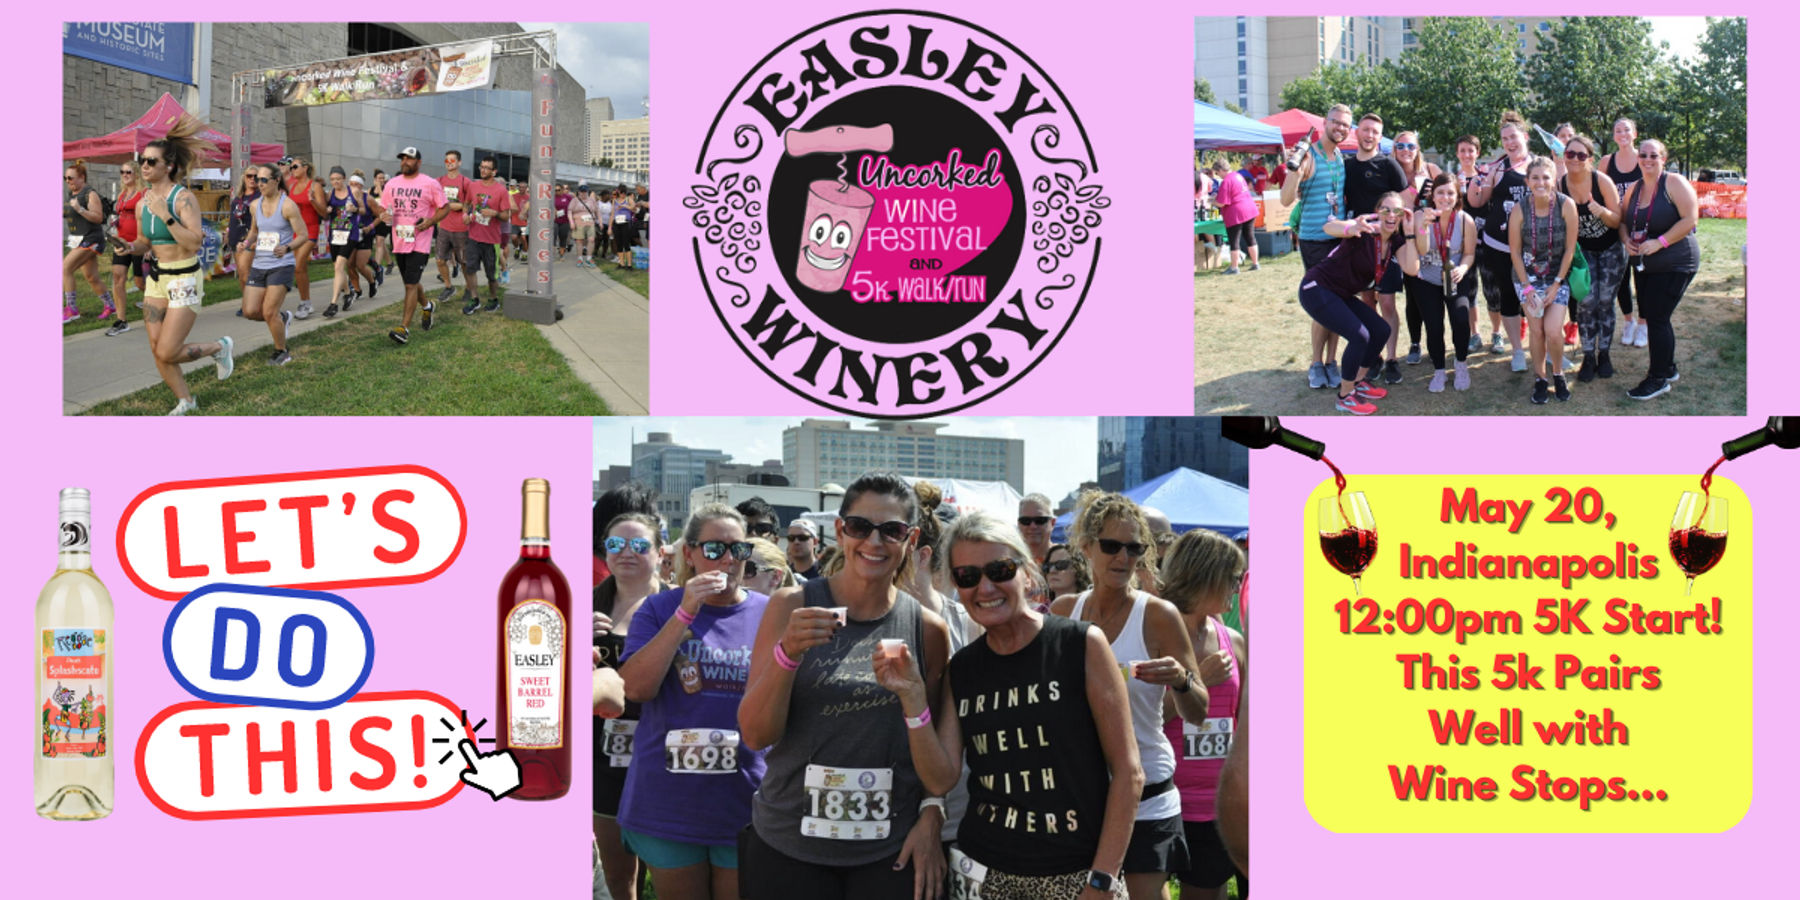 Easley's Uncorked Wine Festival 5K Walk/Run Downtown Indianapolis